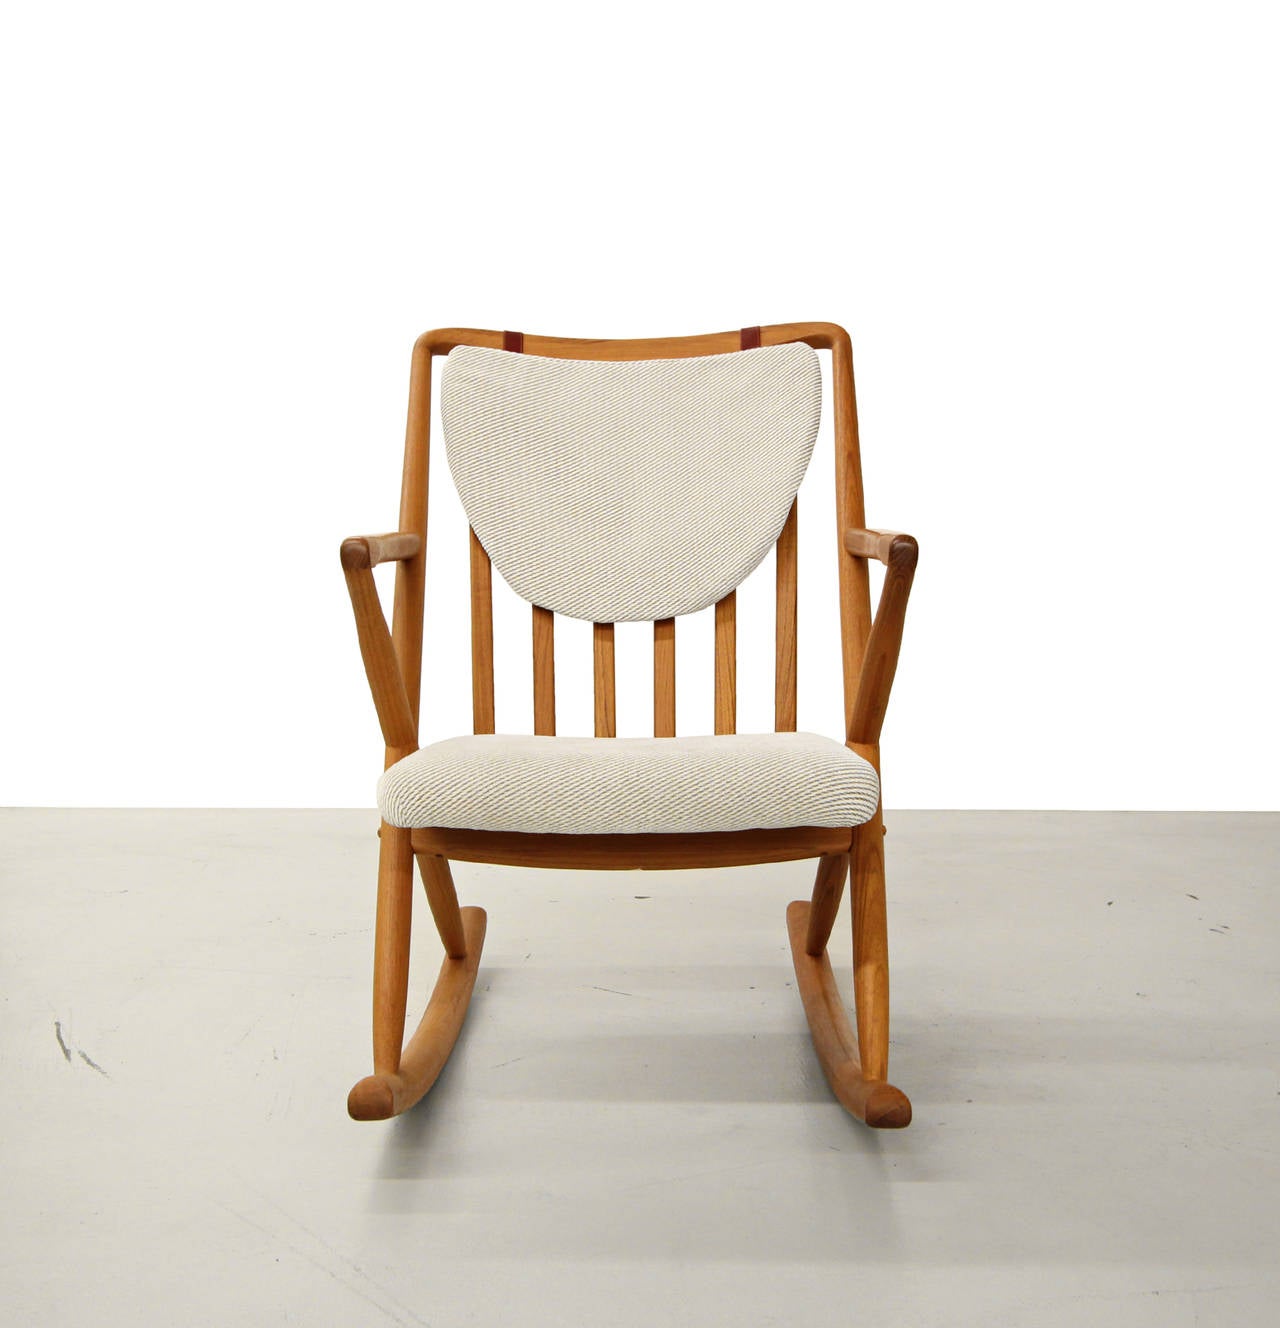 Mint condition Danish teak rocker in the manner of Frank Reenskaug for Bramin.  Perfect nursery or reading corner rocker.  Neutral cream/beige stripe fabric with cognac leather strap attachments.